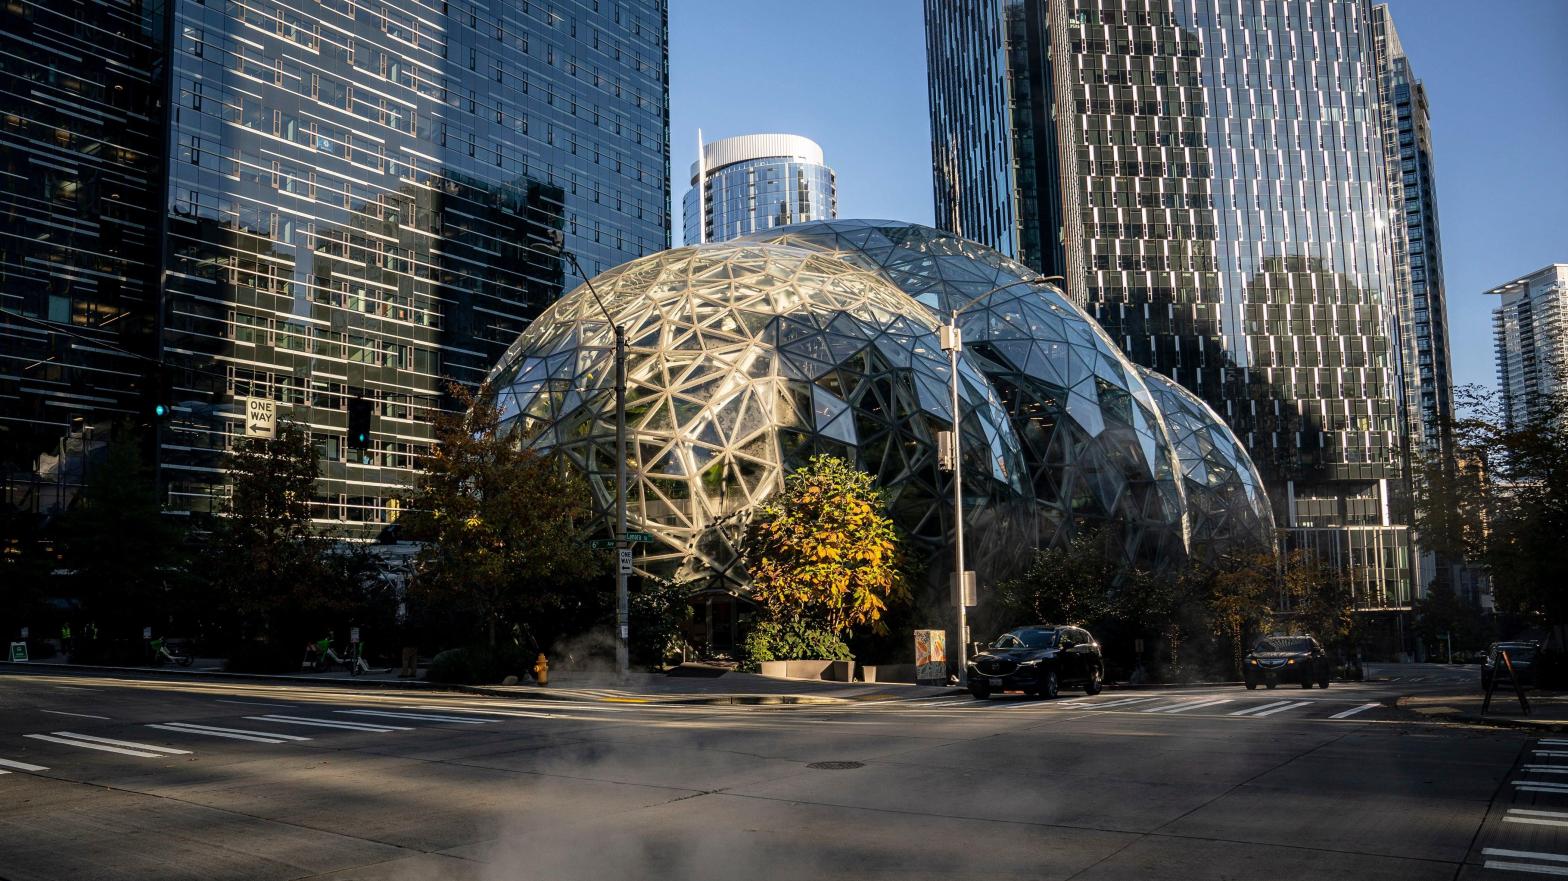 Amazon headquarters, called The Spheres, in Seattle, Washington.  (Image: David Ryder, Getty Images)